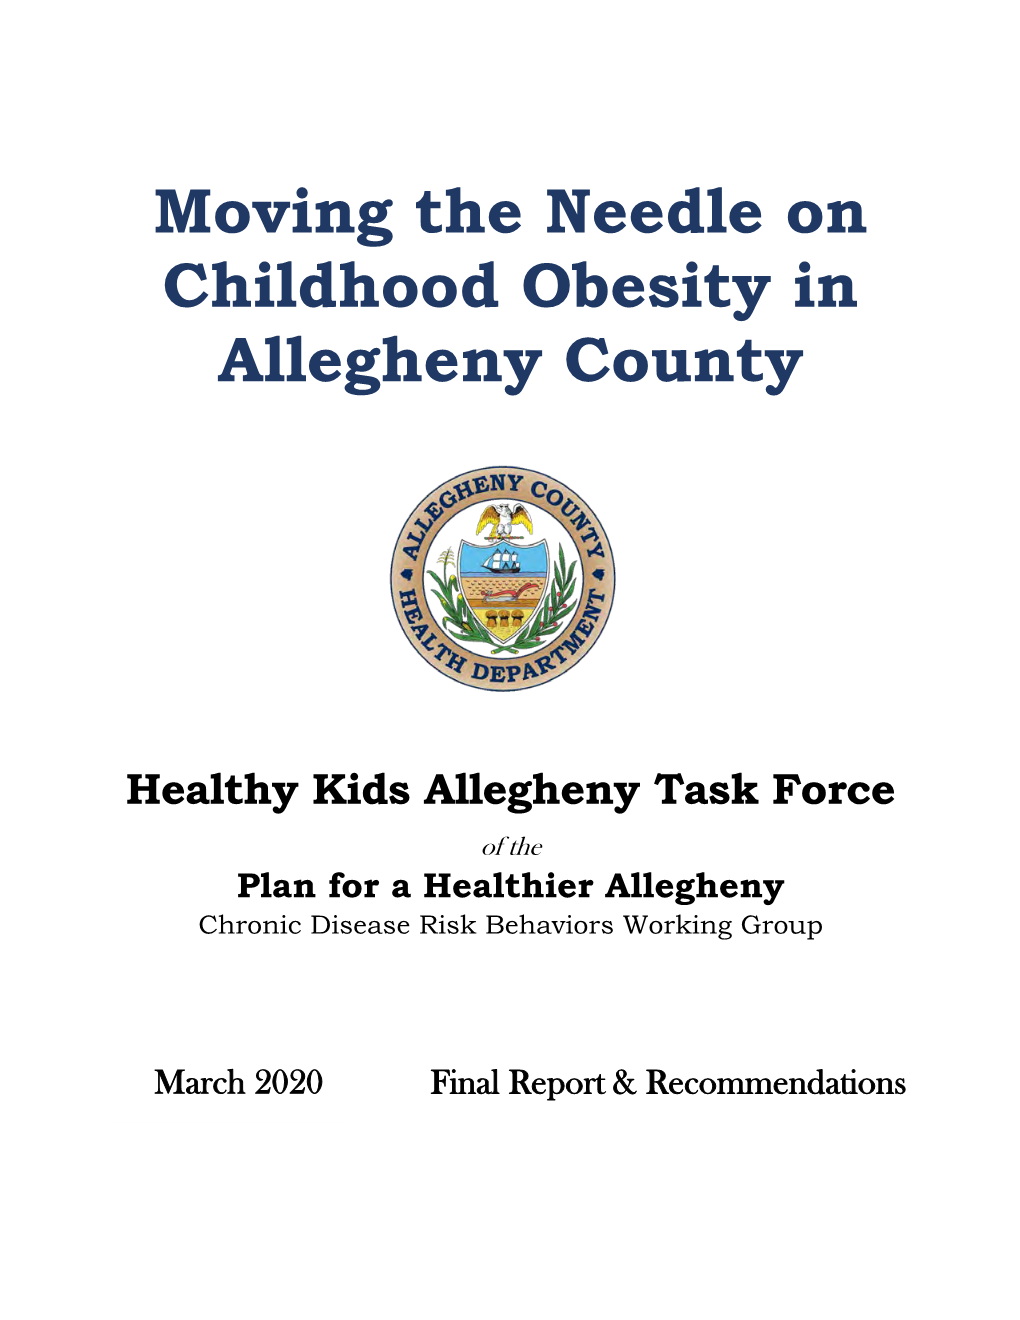 Moving the Needle on Childhood Obesity in Allegheny County